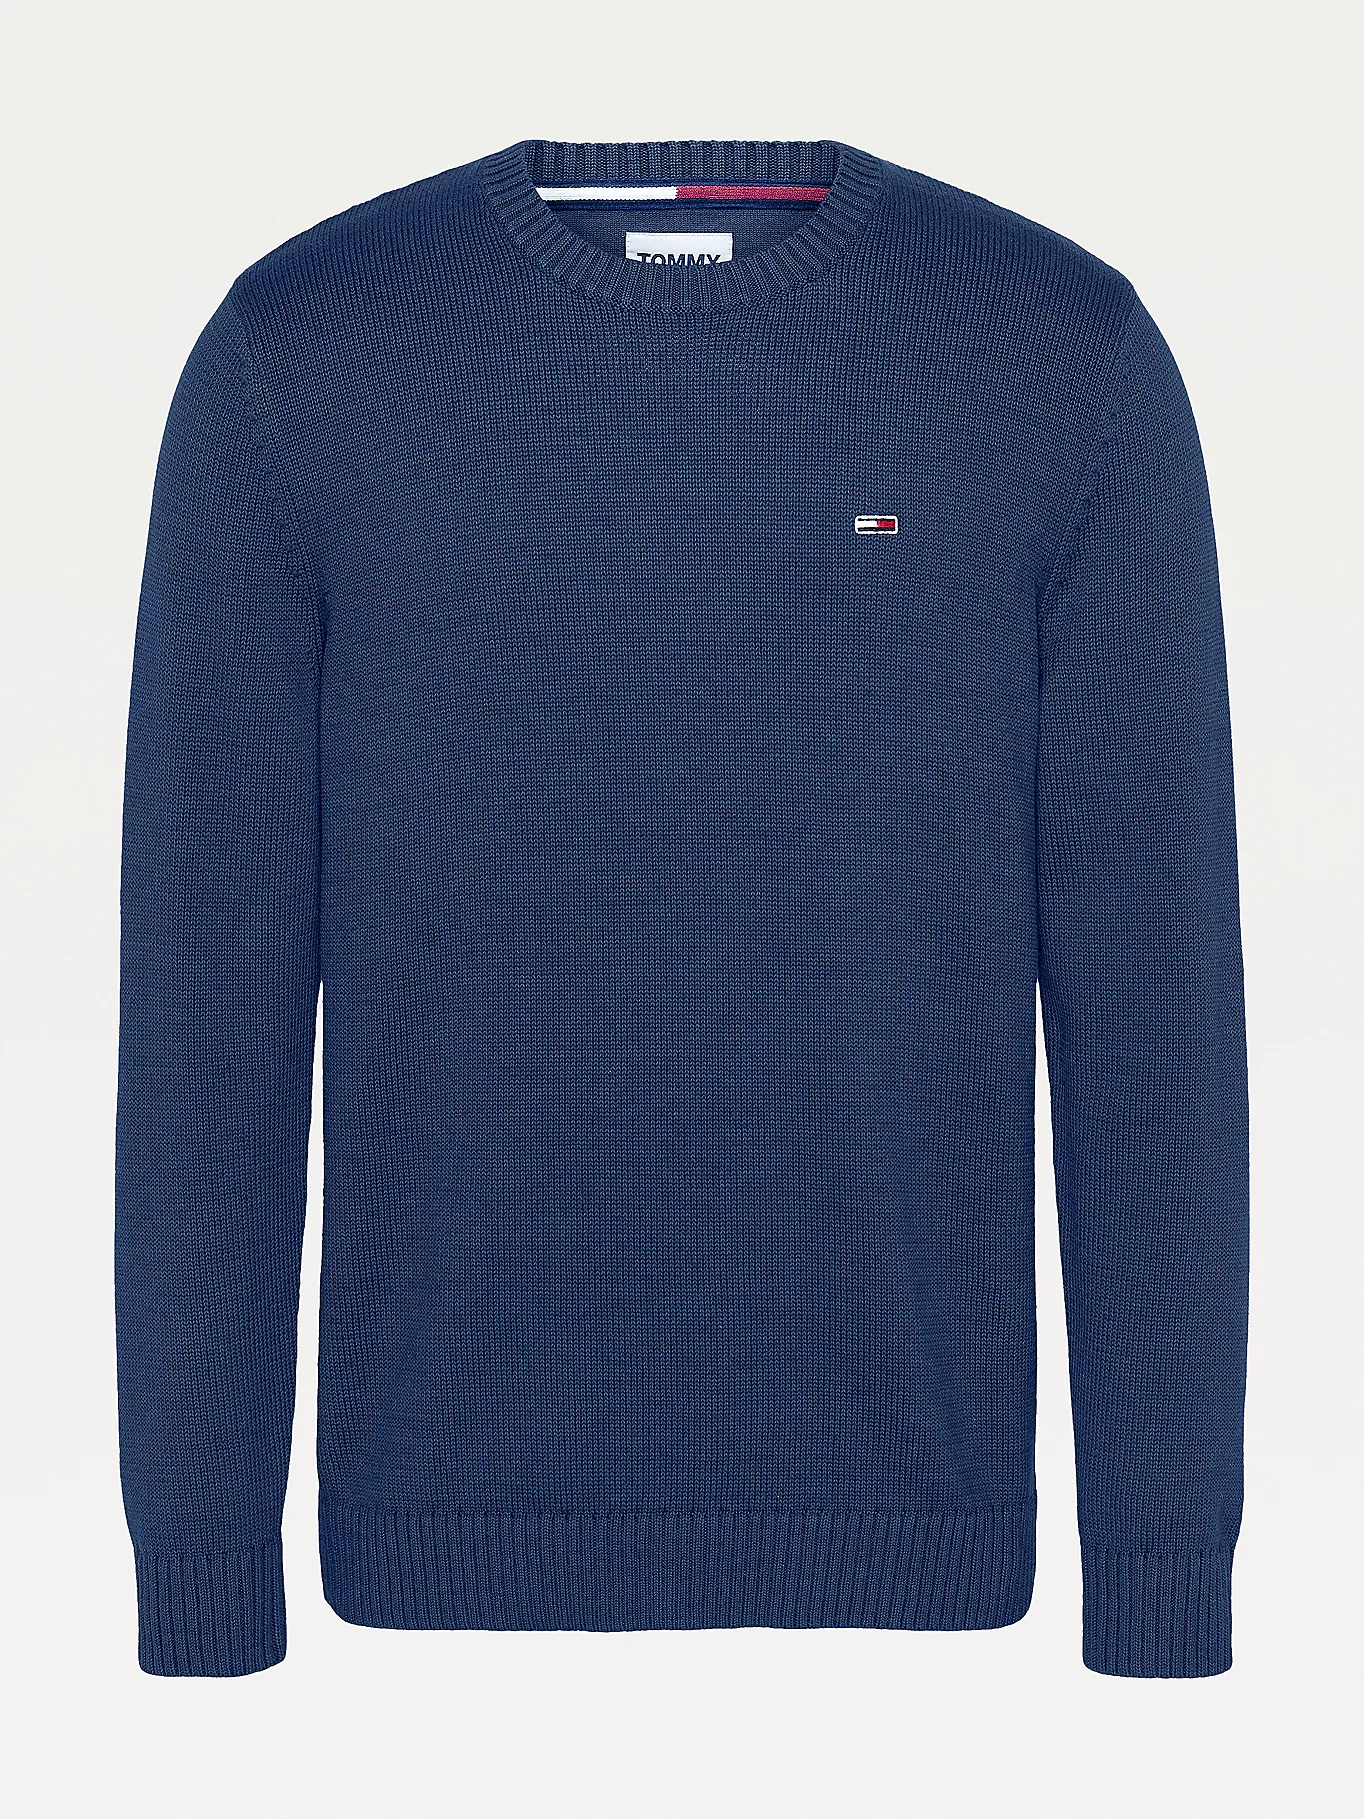 Buy Tommy Jeans Essential Crew Navy Fashion Scandinavian - Twilight Store Neck